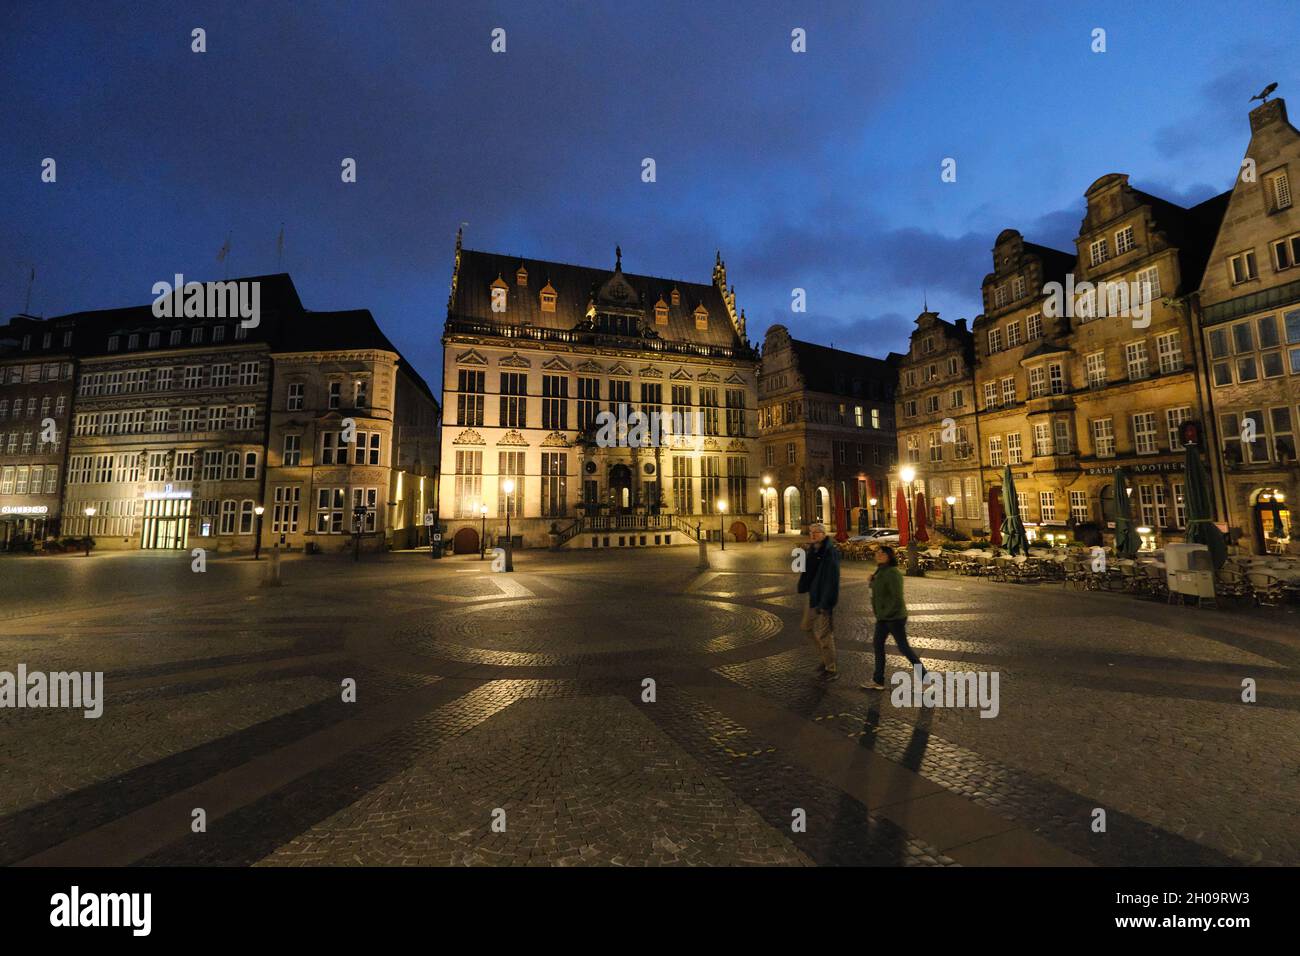 '06.06.2021, Germany, Bremen, Bremen - Weser Renaissance building on the market square, in the center the Schuetting (seat of the Chamber of Commerce) Stock Photo